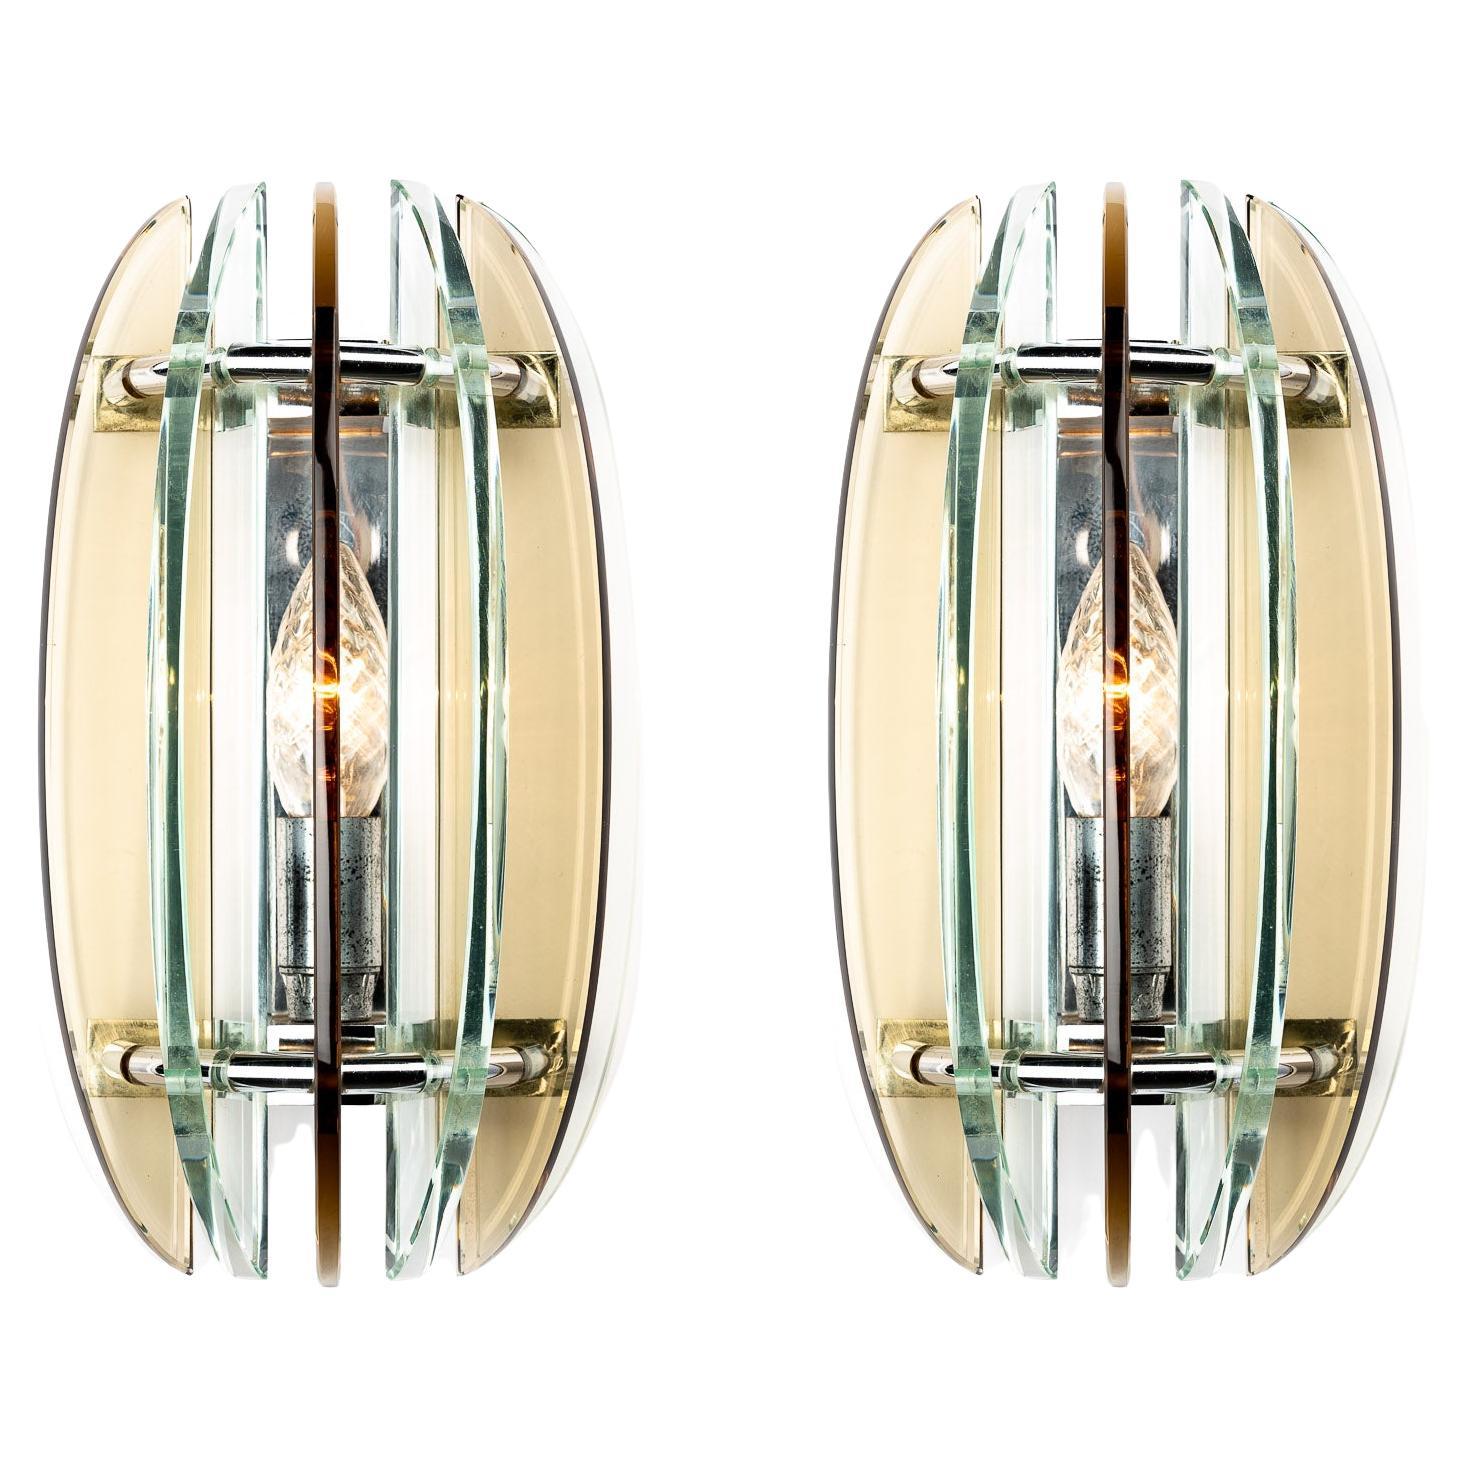 1970s Glass and Metal Walls Light by Veca